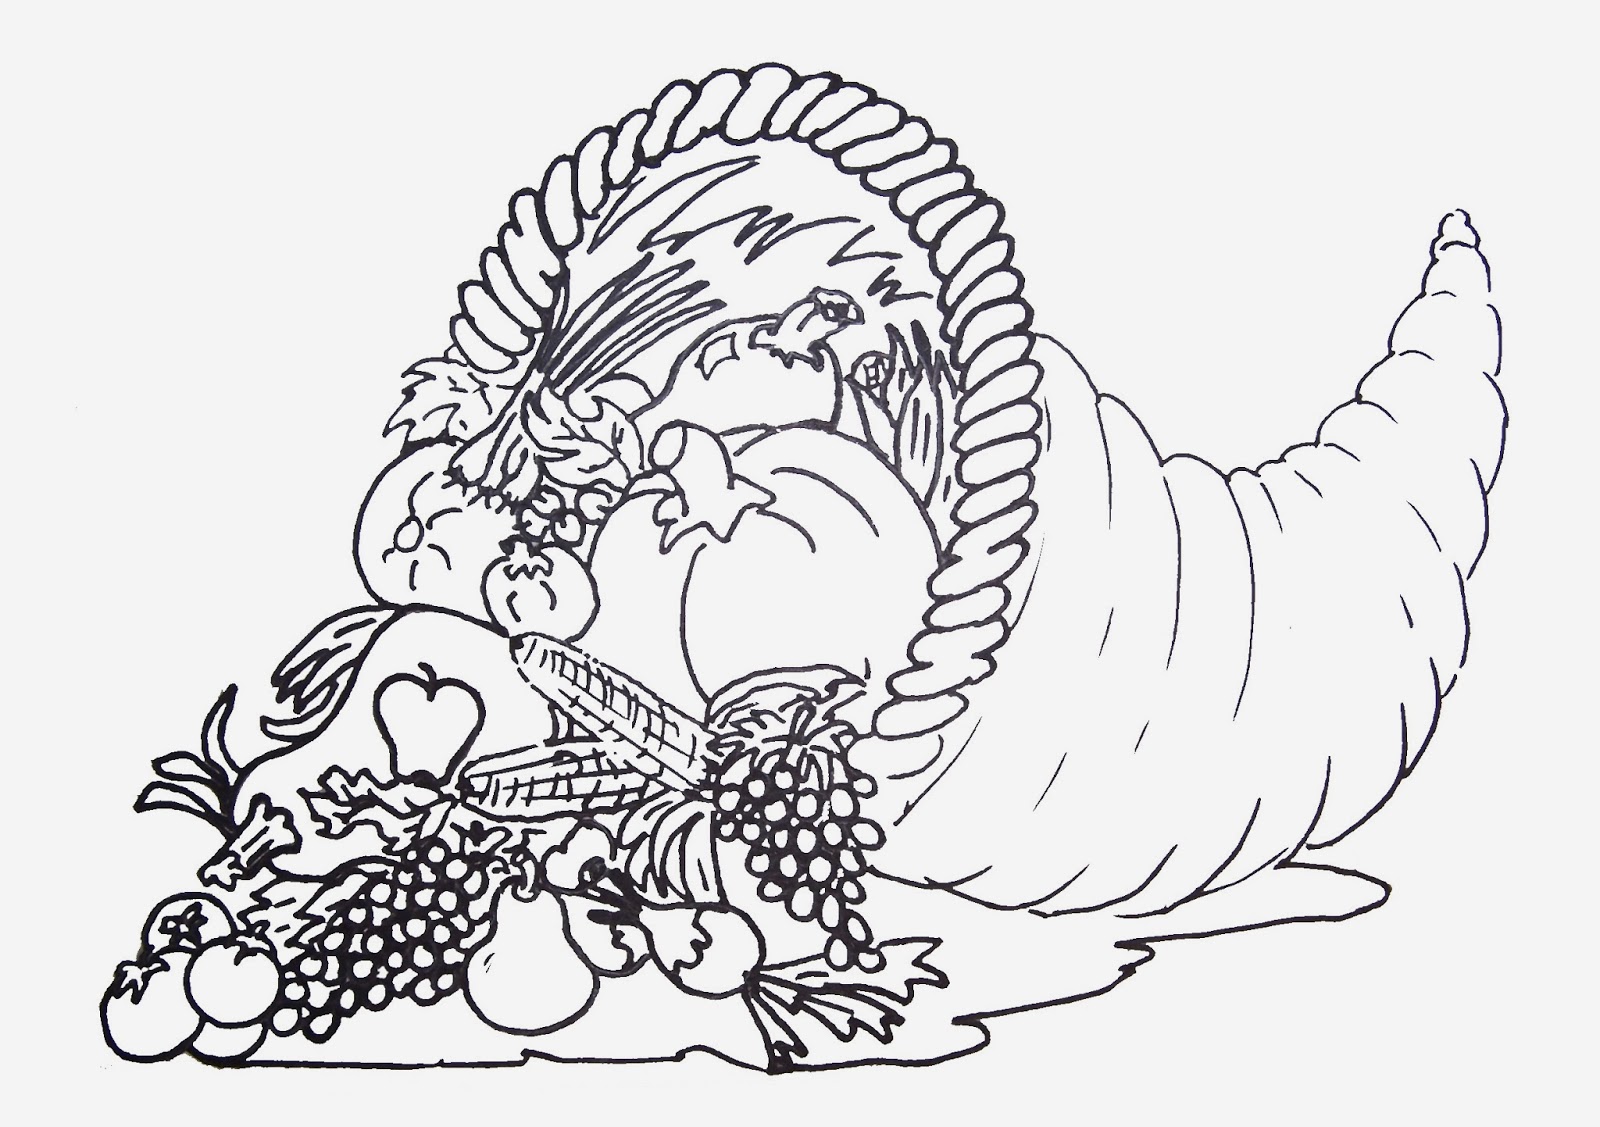 cornucopia-coloring-pages-to-download-and-print-for-free